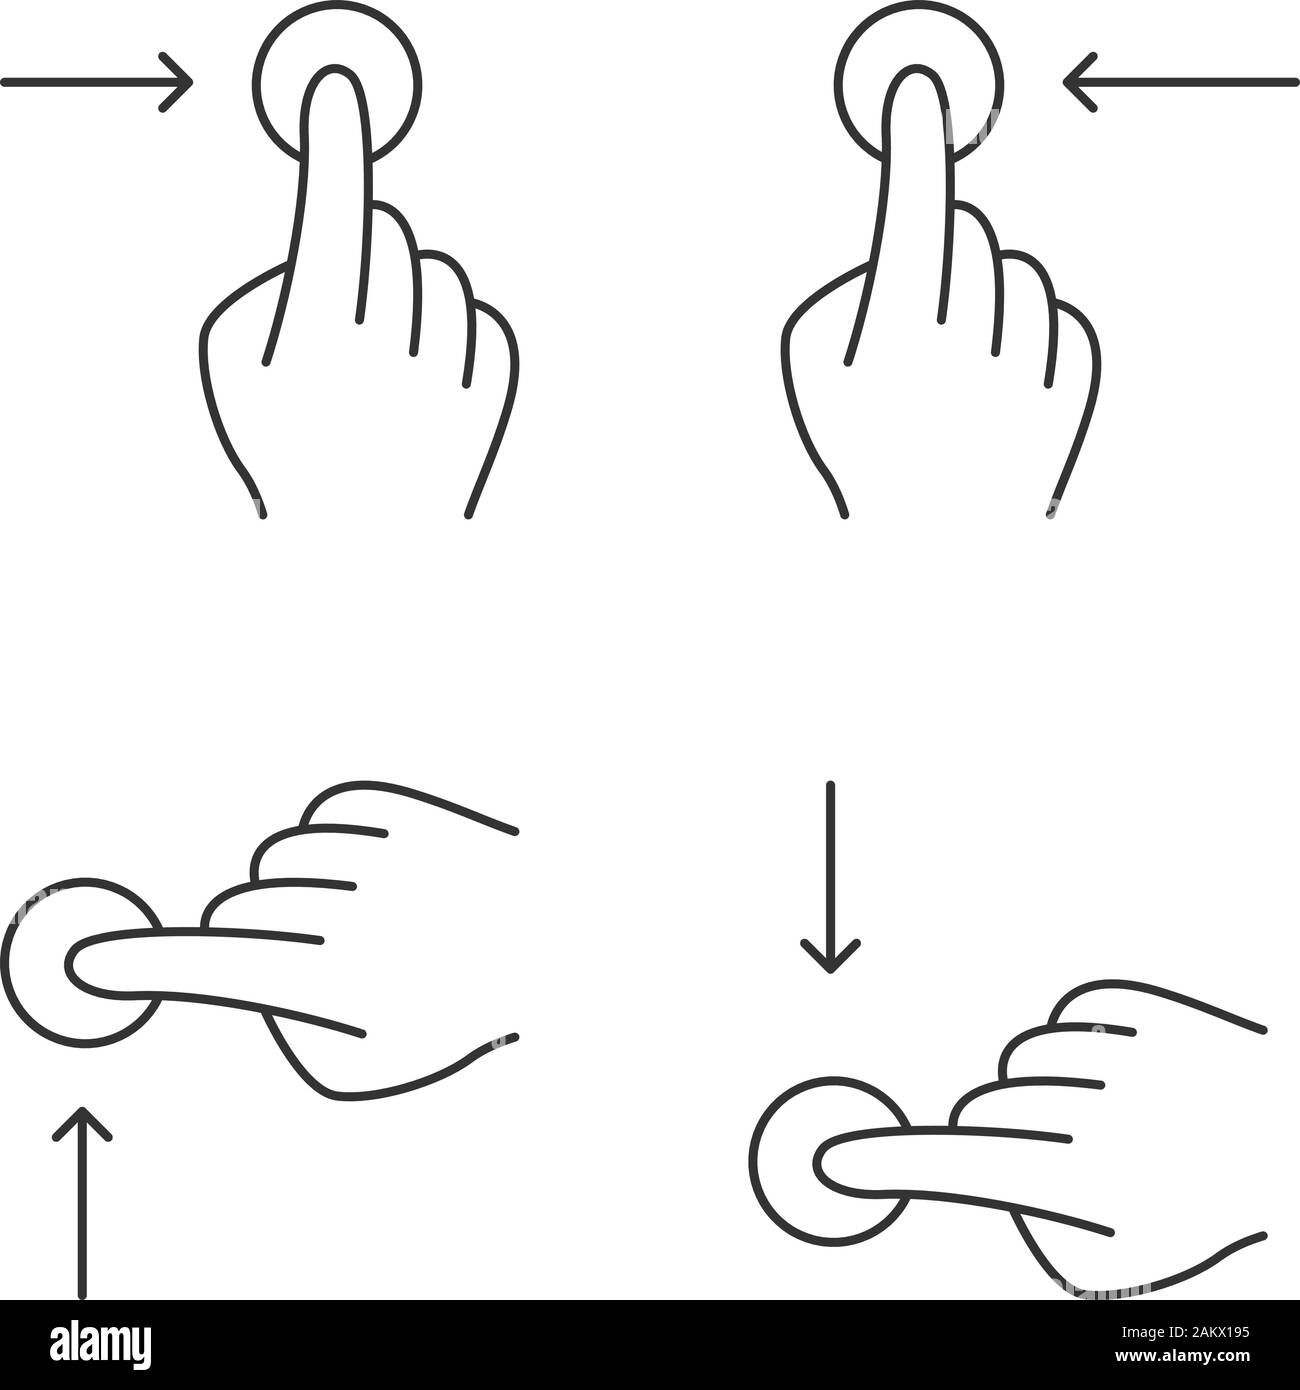 Touchscreen gestures linear icons set. Horizontal scroll left, scroll right gesturing. Vertical scroll up, scroll down. Thin line contour symbols. Iso Stock Vector